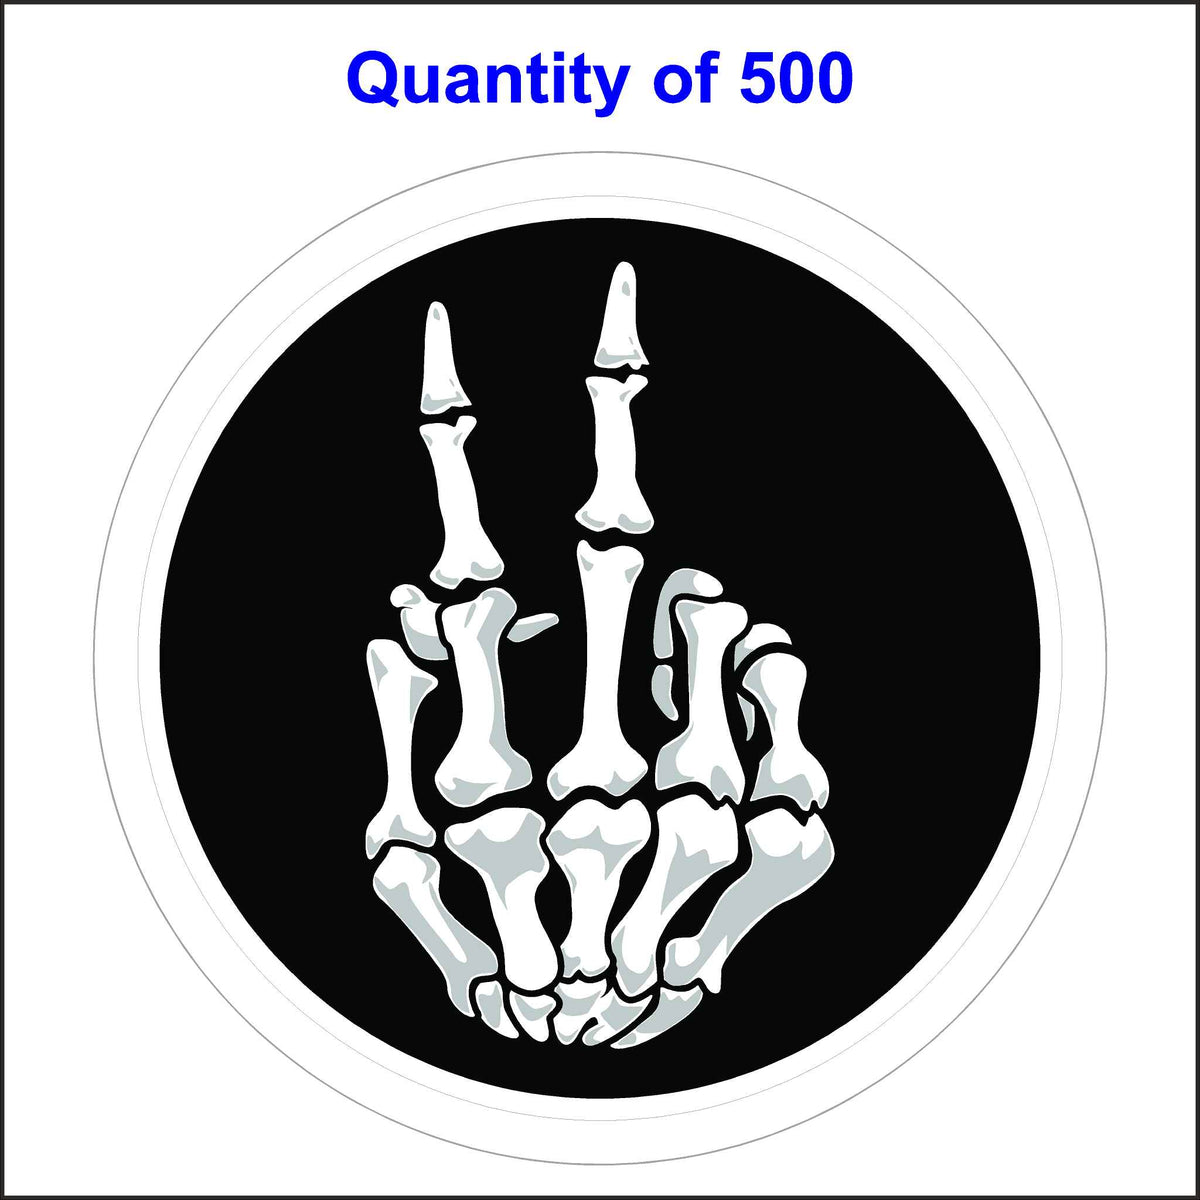 This Skeleton Hand Peace Sign Sticker Has a Skeleton Hand Showing the Peace Sign On a Black Background. 500 Quantity